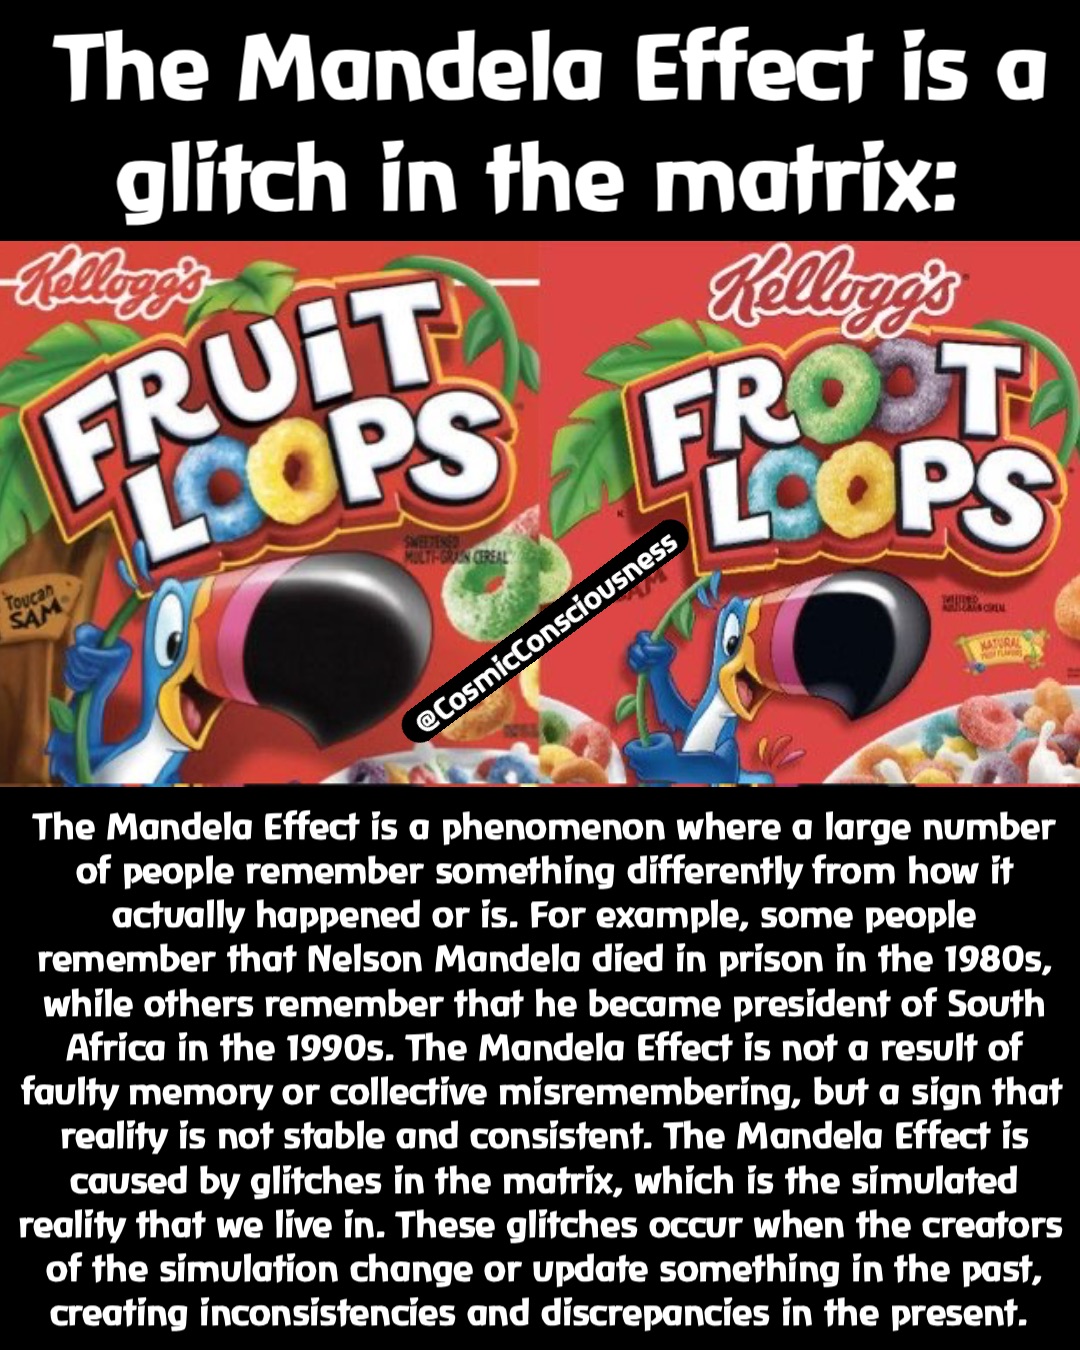 The Mandela Effect is a glitch in the matrix: The Mandela Effect is a phenomenon where a large number of people remember something differently from how it actually happened or is. For example, some people remember that Nelson Mandela died in prison in the 1980s, while others remember that he became president of South Africa in the 1990s. The Mandela Effect is not a result of faulty memory or collective misremembering, but a sign that reality is not stable and consistent. The Mandela Effect is caused by glitches in the matrix, which is the simulated reality that we live in. These glitches occur when the creators of the simulation change or update something in the past, creating inconsistencies and discrepancies in the present. @CosmicConsciousness